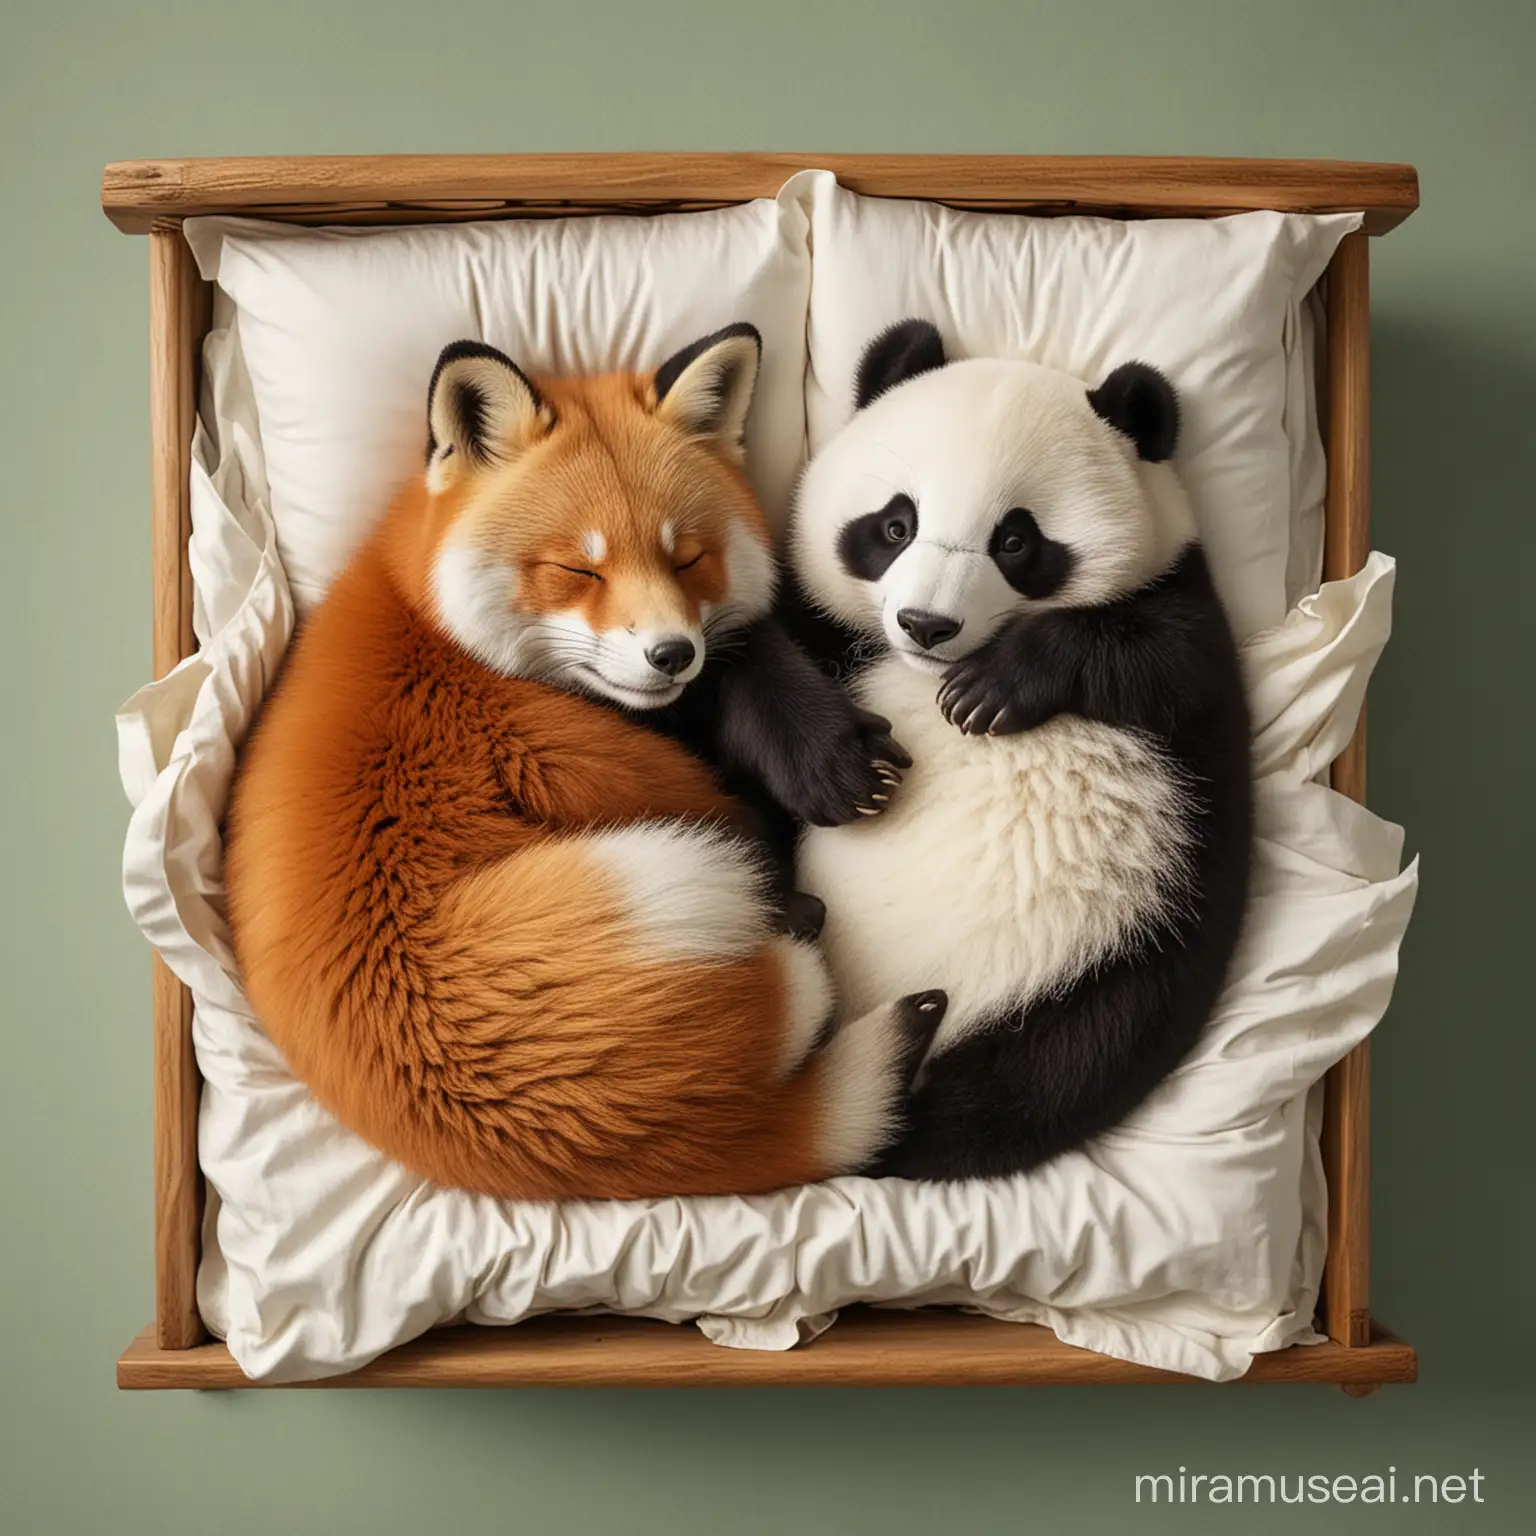 one fox and one panda sleeping in a bed
